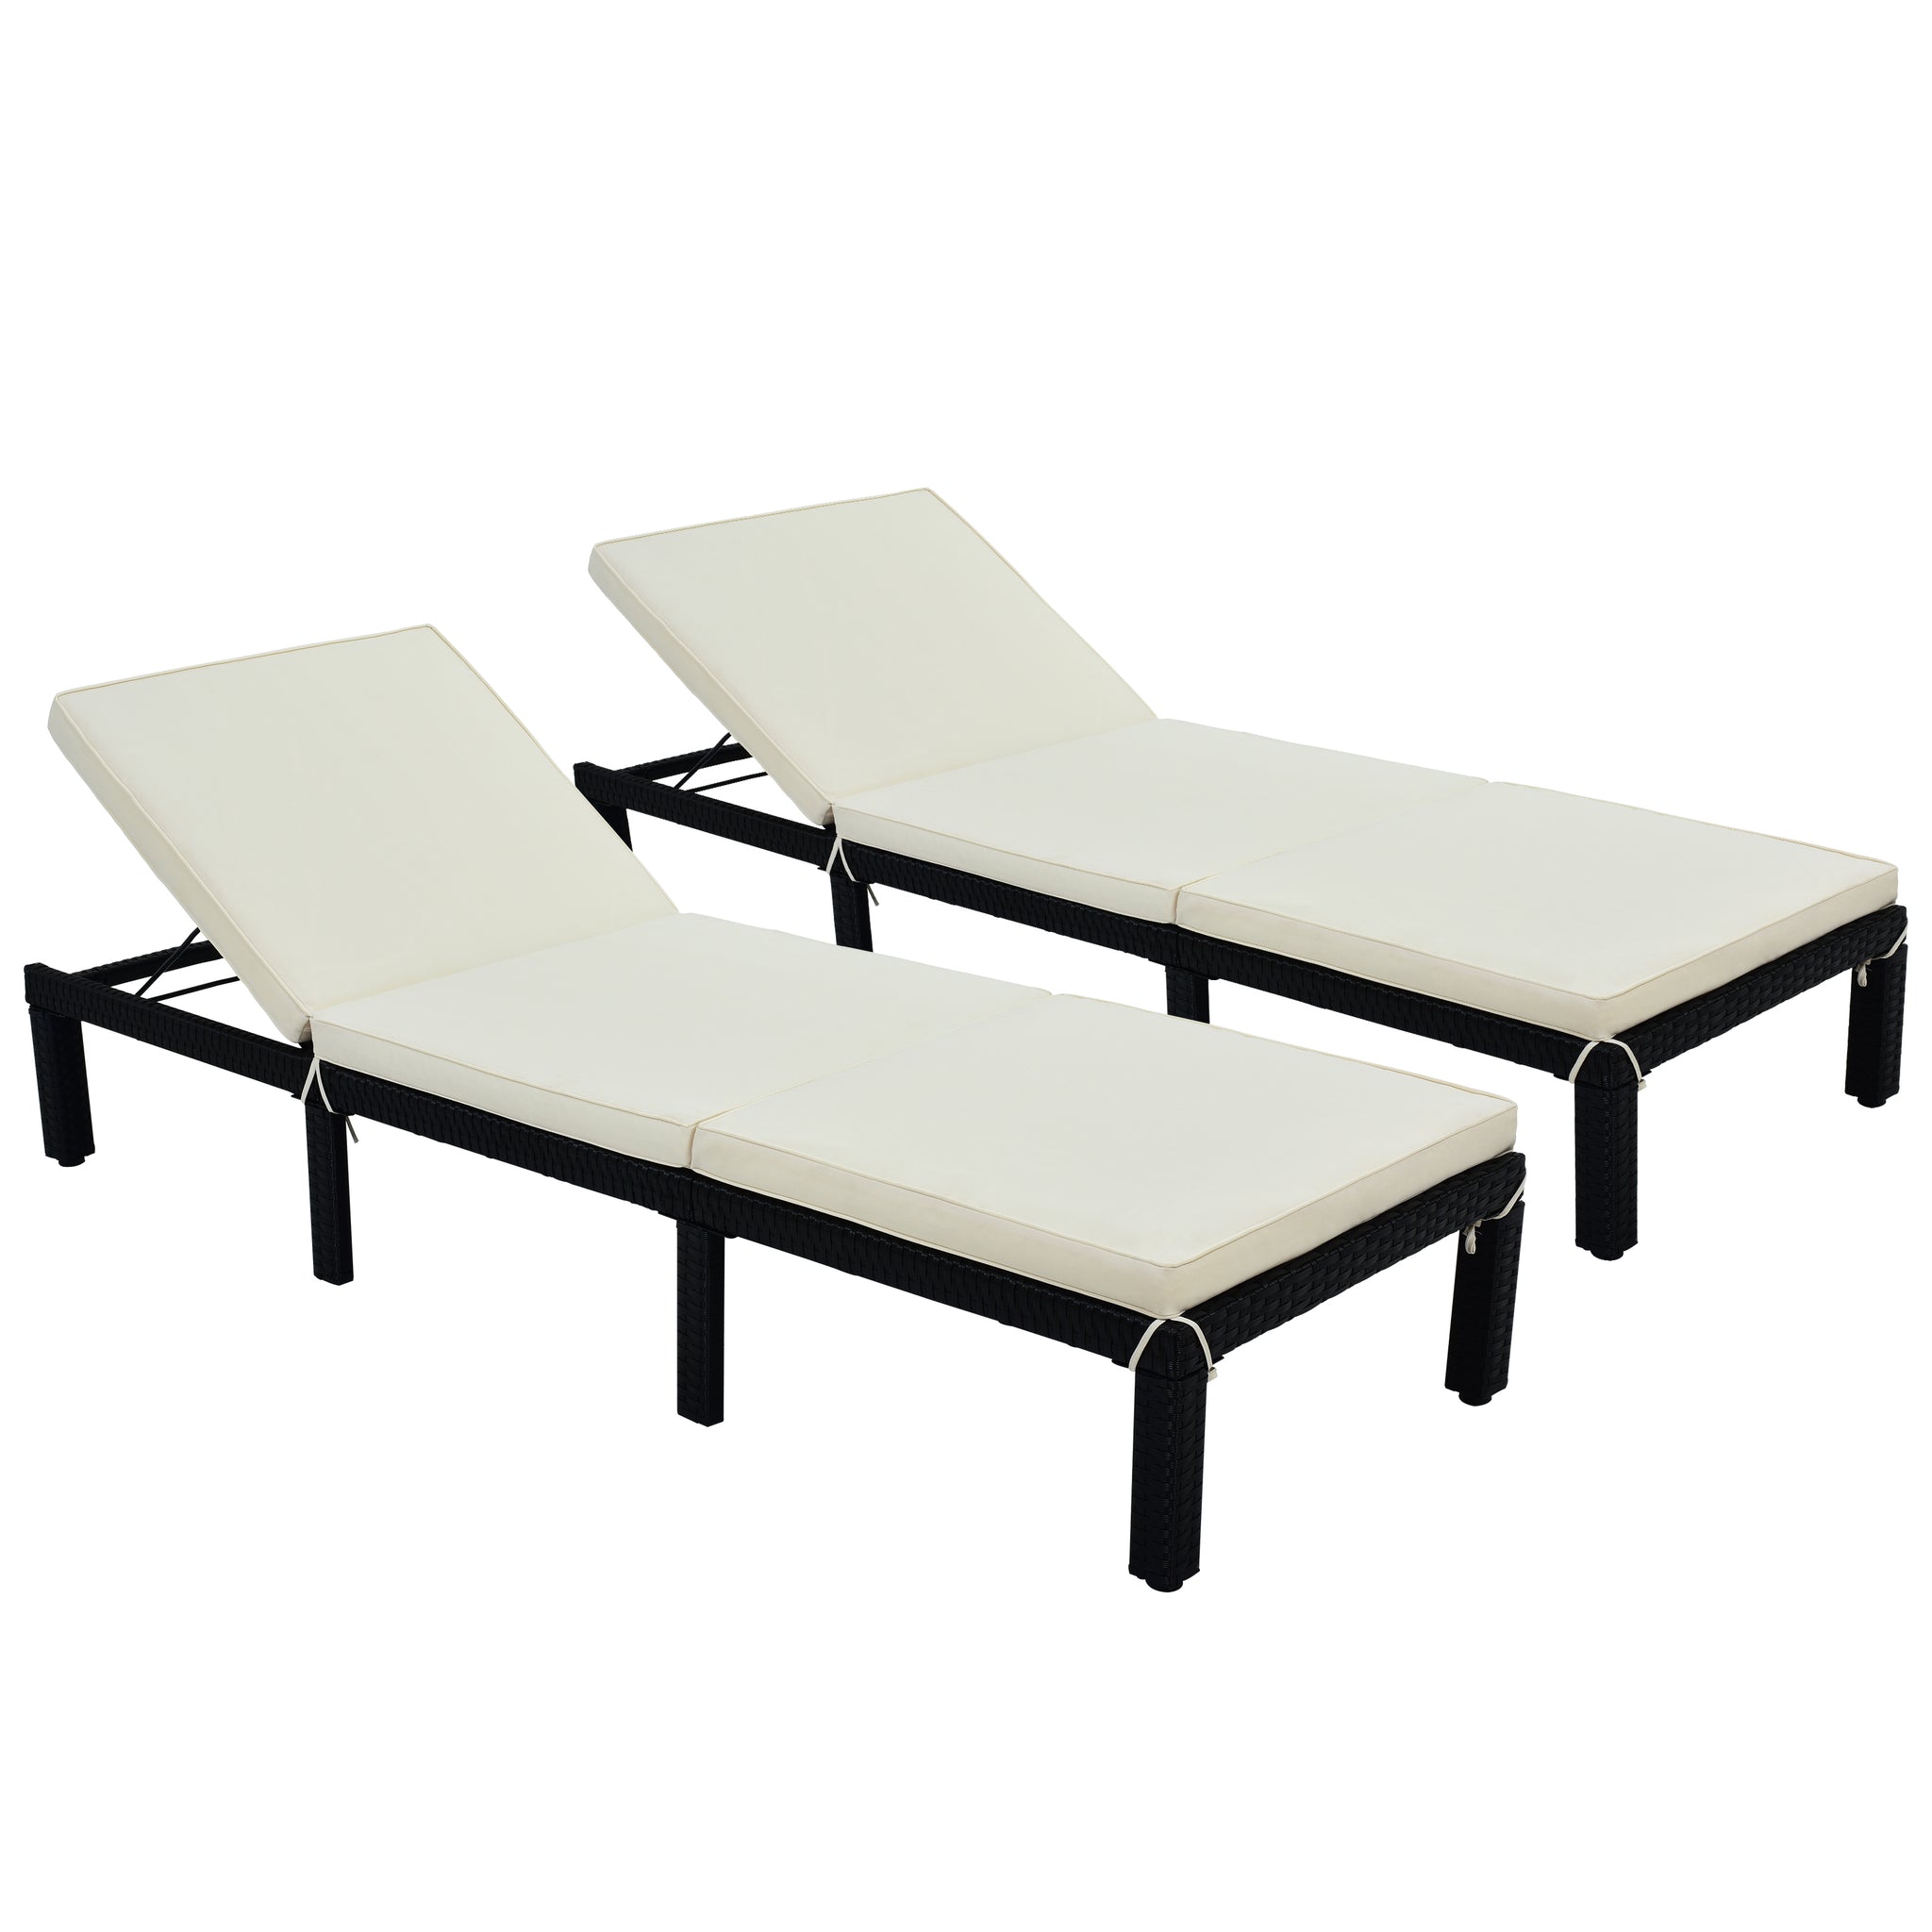 Patio Furniture Outdoor Adjustable PE Rattan Wicker Chaise Lounge Chair Sunbed, Set of 2